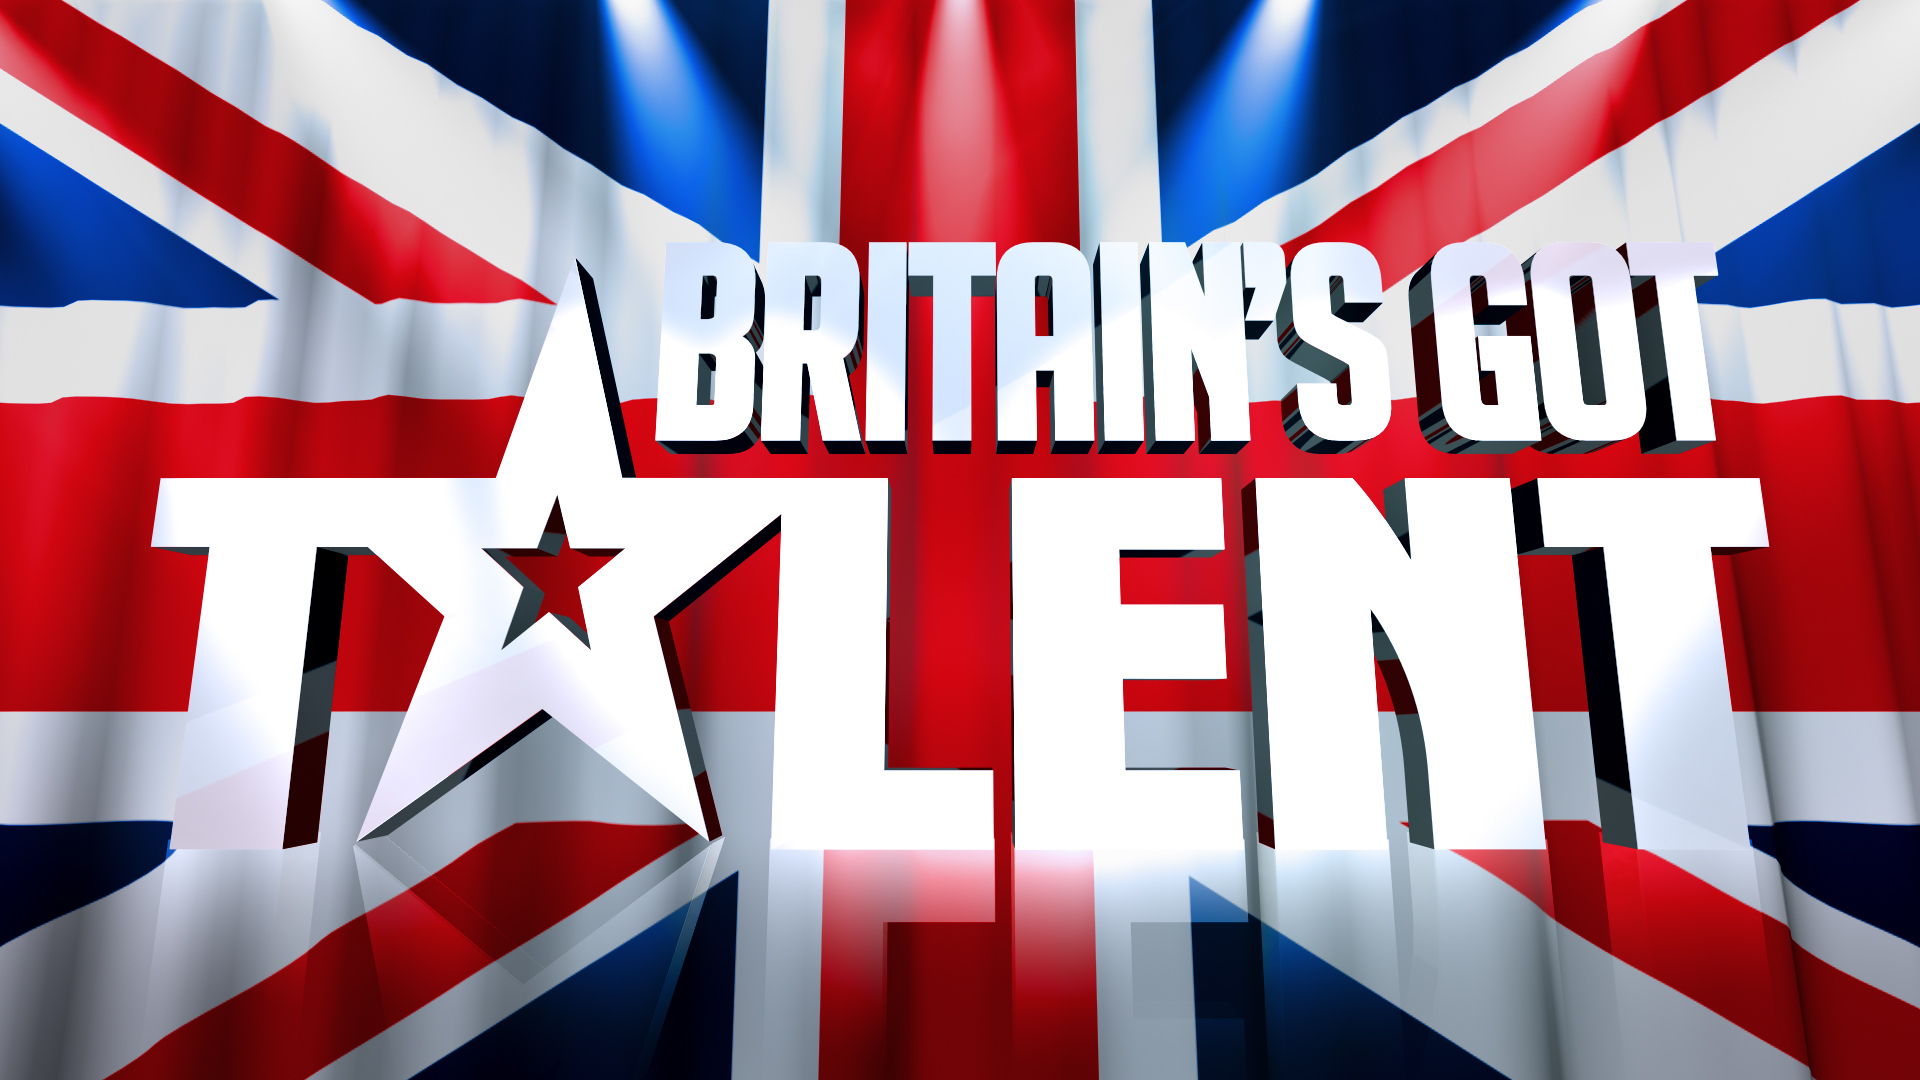 Britains Got Talent in new fix row as blind opera singer has already won another huge TV talent show [Video]